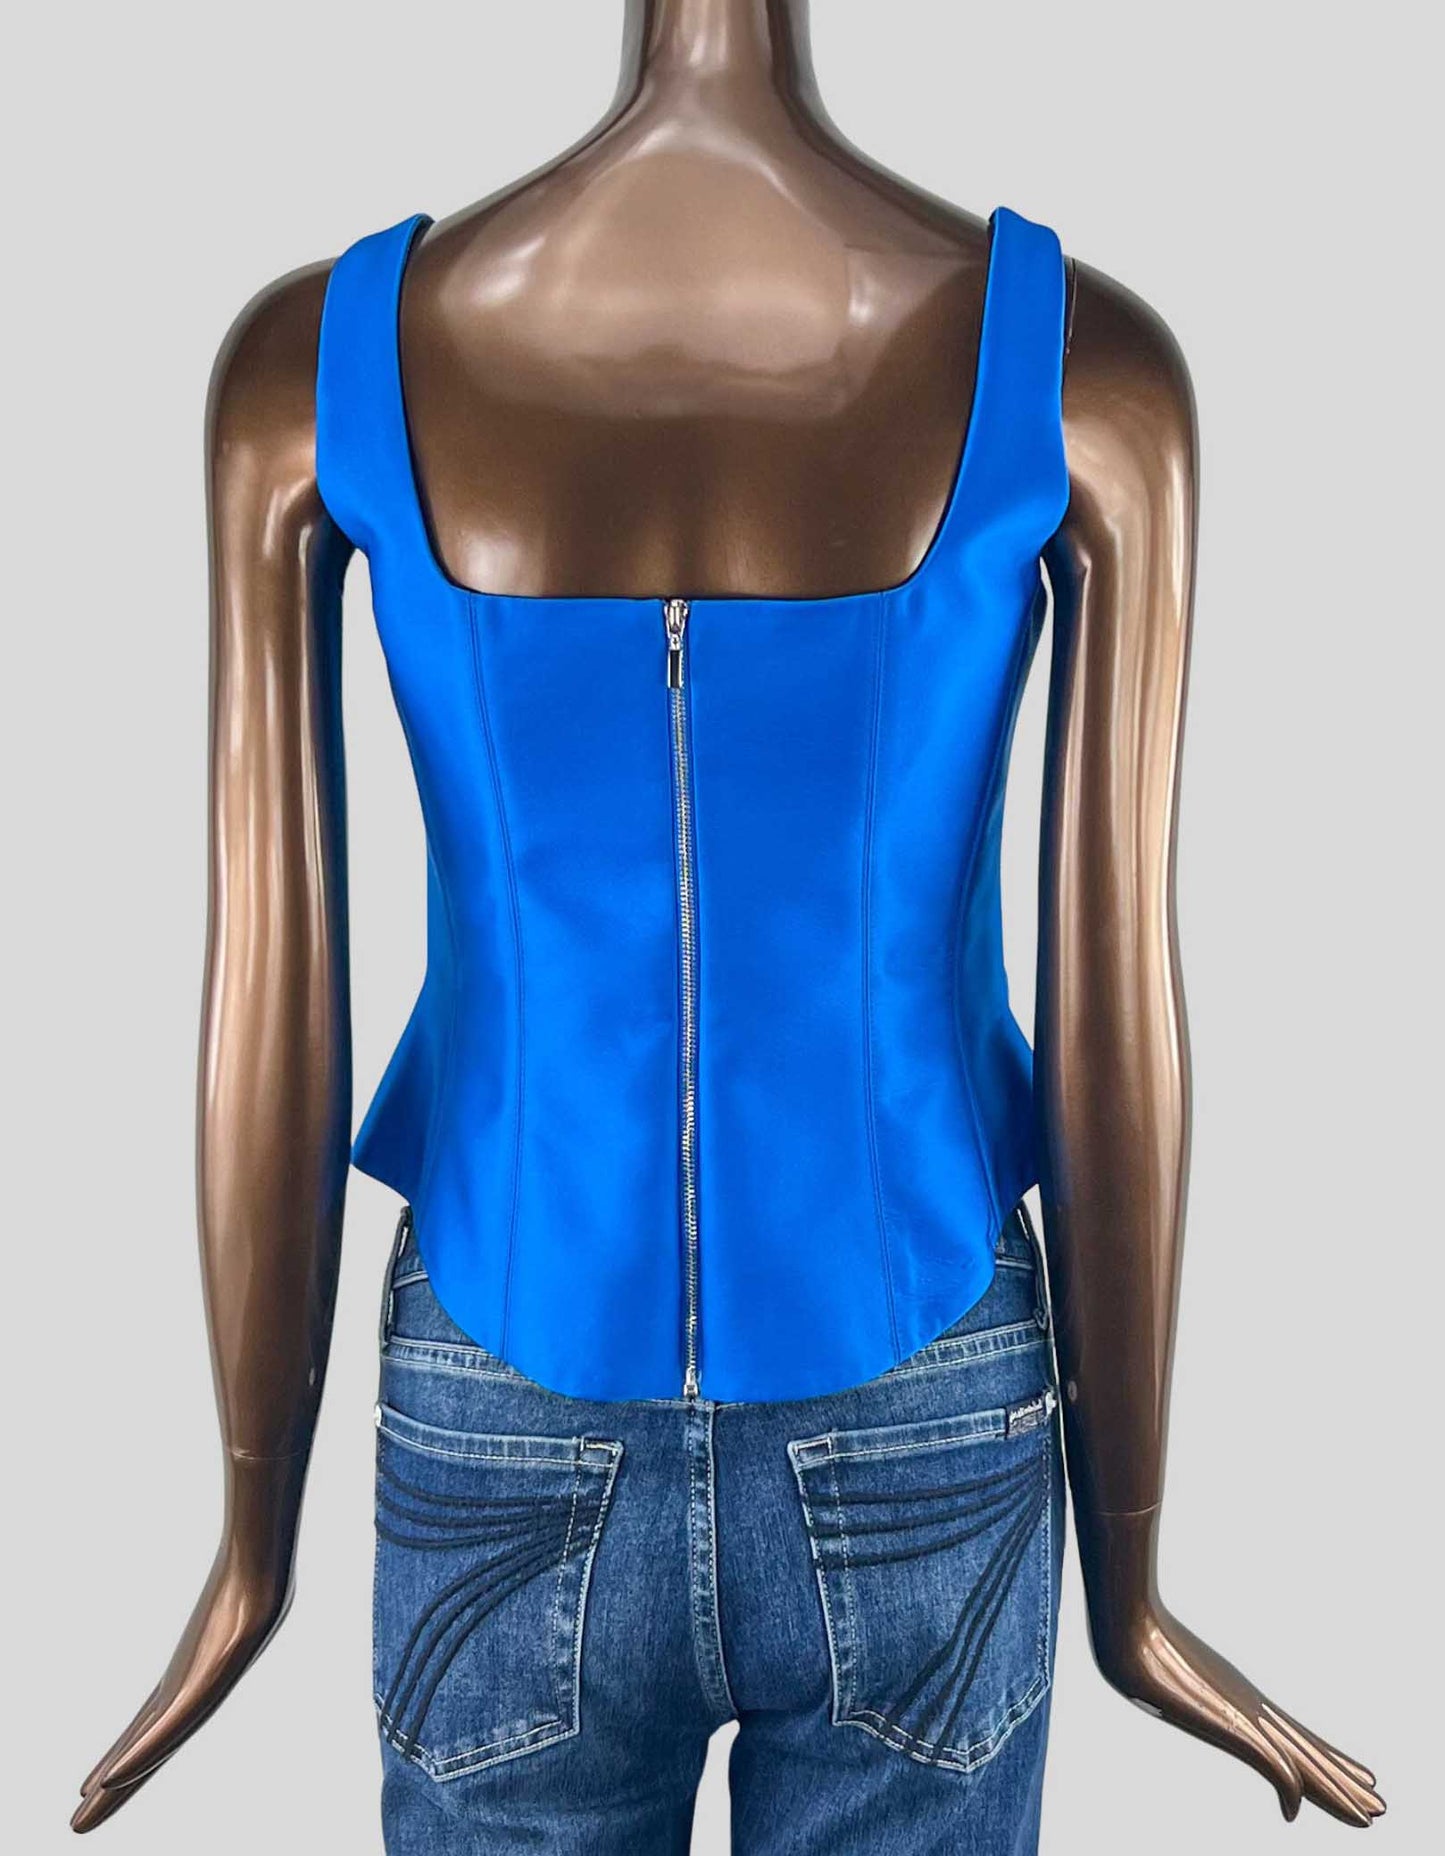 ROZIE CORSET Corset Top in electric blue - 42 | XL | 10-12 US